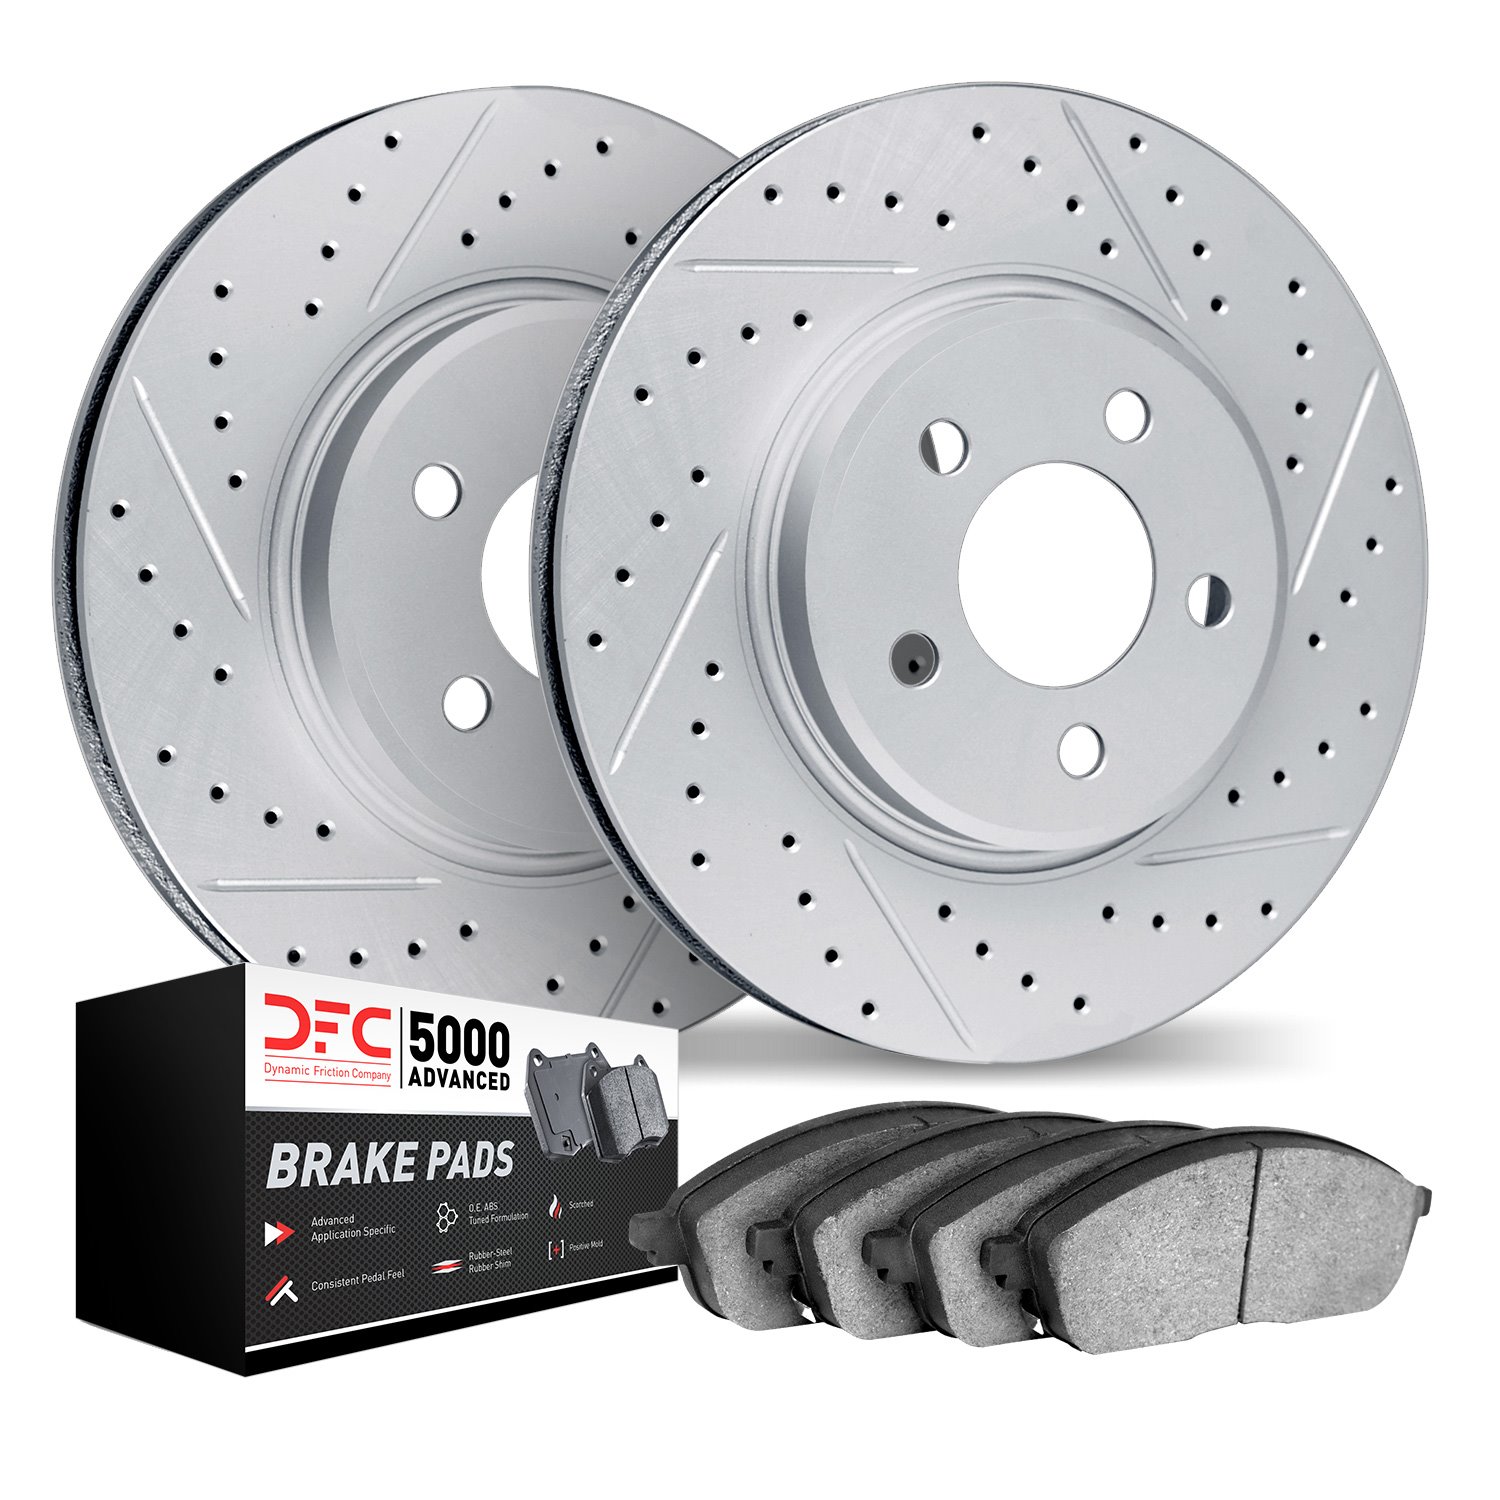 2502-20044 Geoperformance Drilled/Slotted Rotors w/5000 Advanced Brake Pads Kit, 2018-2020 Multiple Makes/Models, Position: Fron